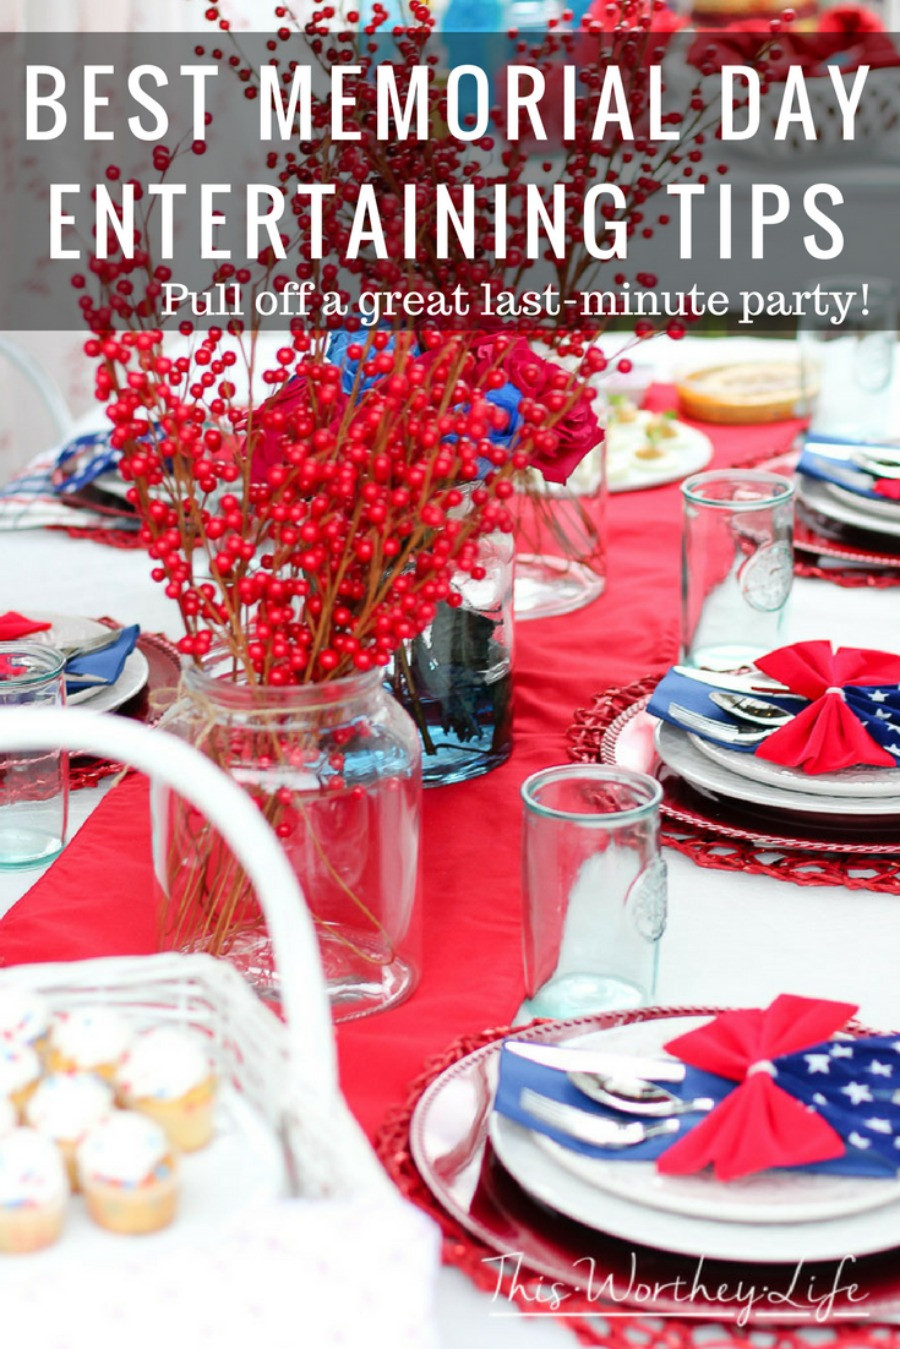 Memorial Day Travel Ideas
 Best Memorial Day Entertaining Tips Pull off a great last